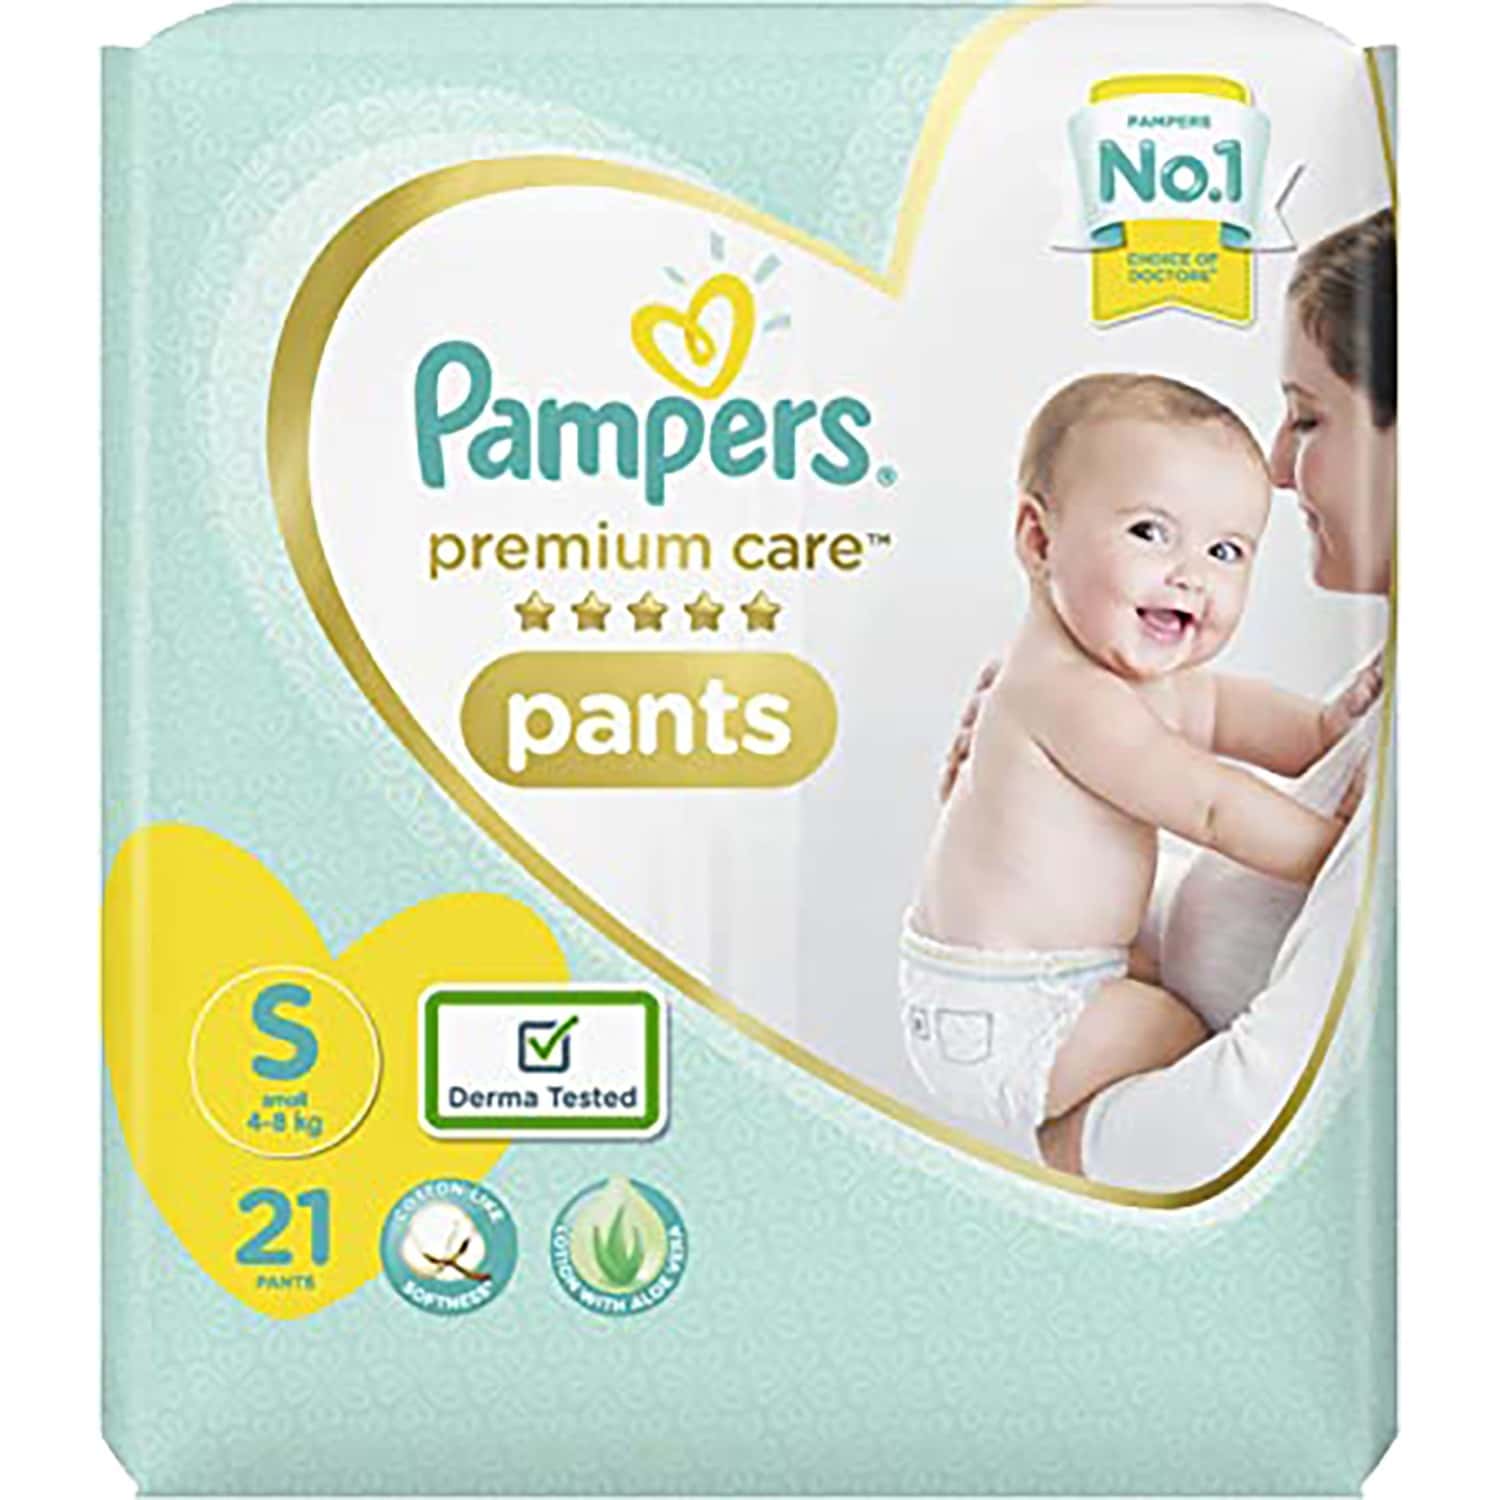 Buy Huggies Dry Pants, Small (S) Size Baby Diaper Pants, 36 count, with  Bubble Bed Technology for comfort & Wonder Pants, Mega Jumbo Pack Diapers, Small  Size, (4.0 kg - 8.0 kg) (